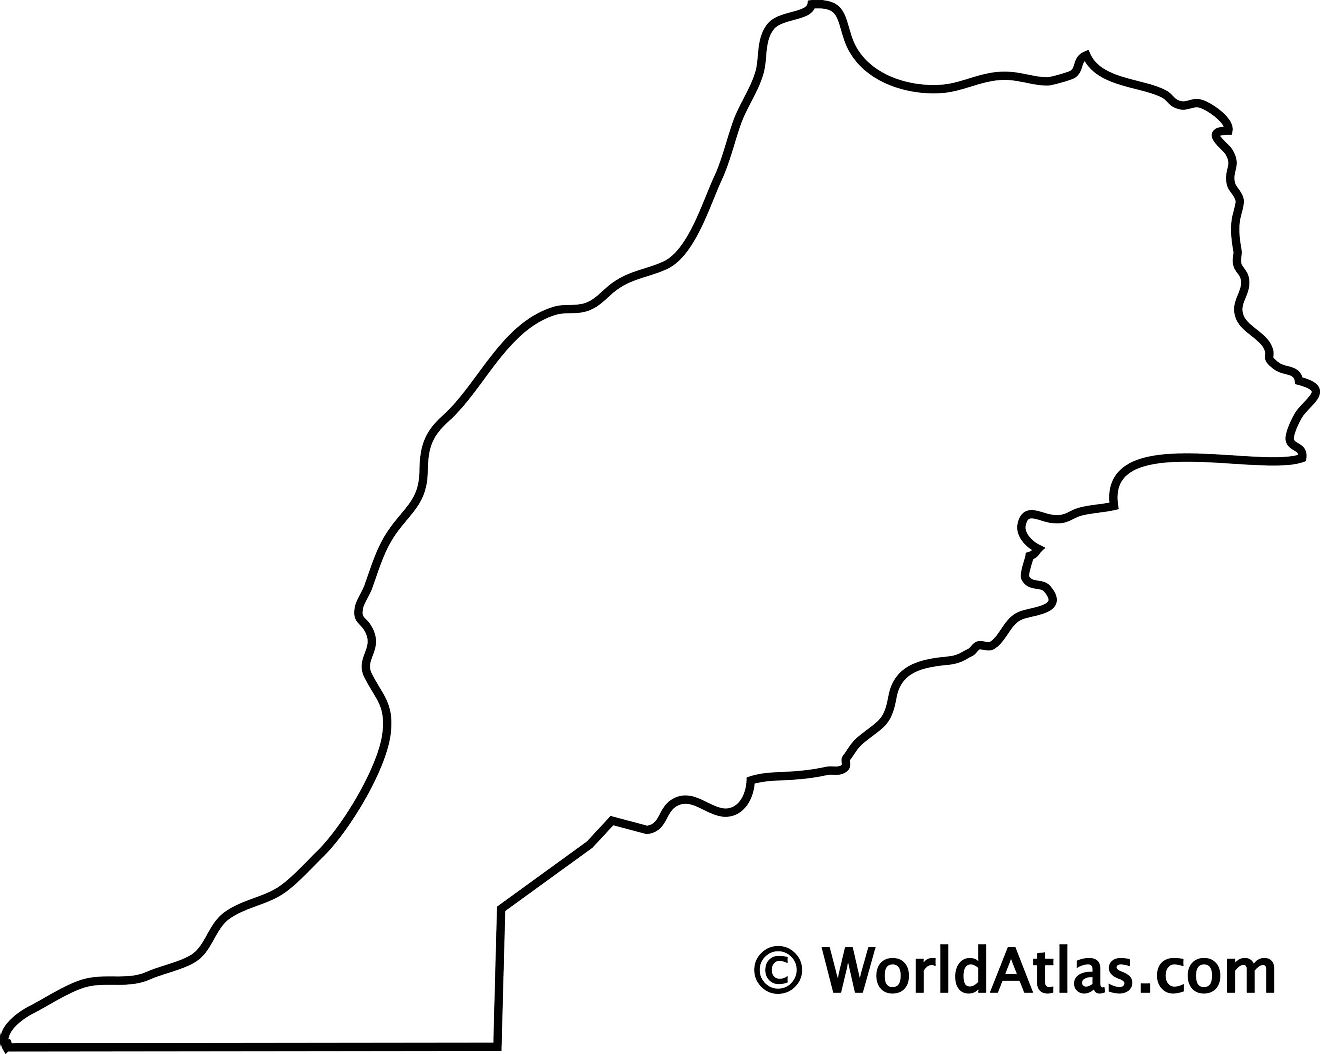 Blank Outline Map of Morocco